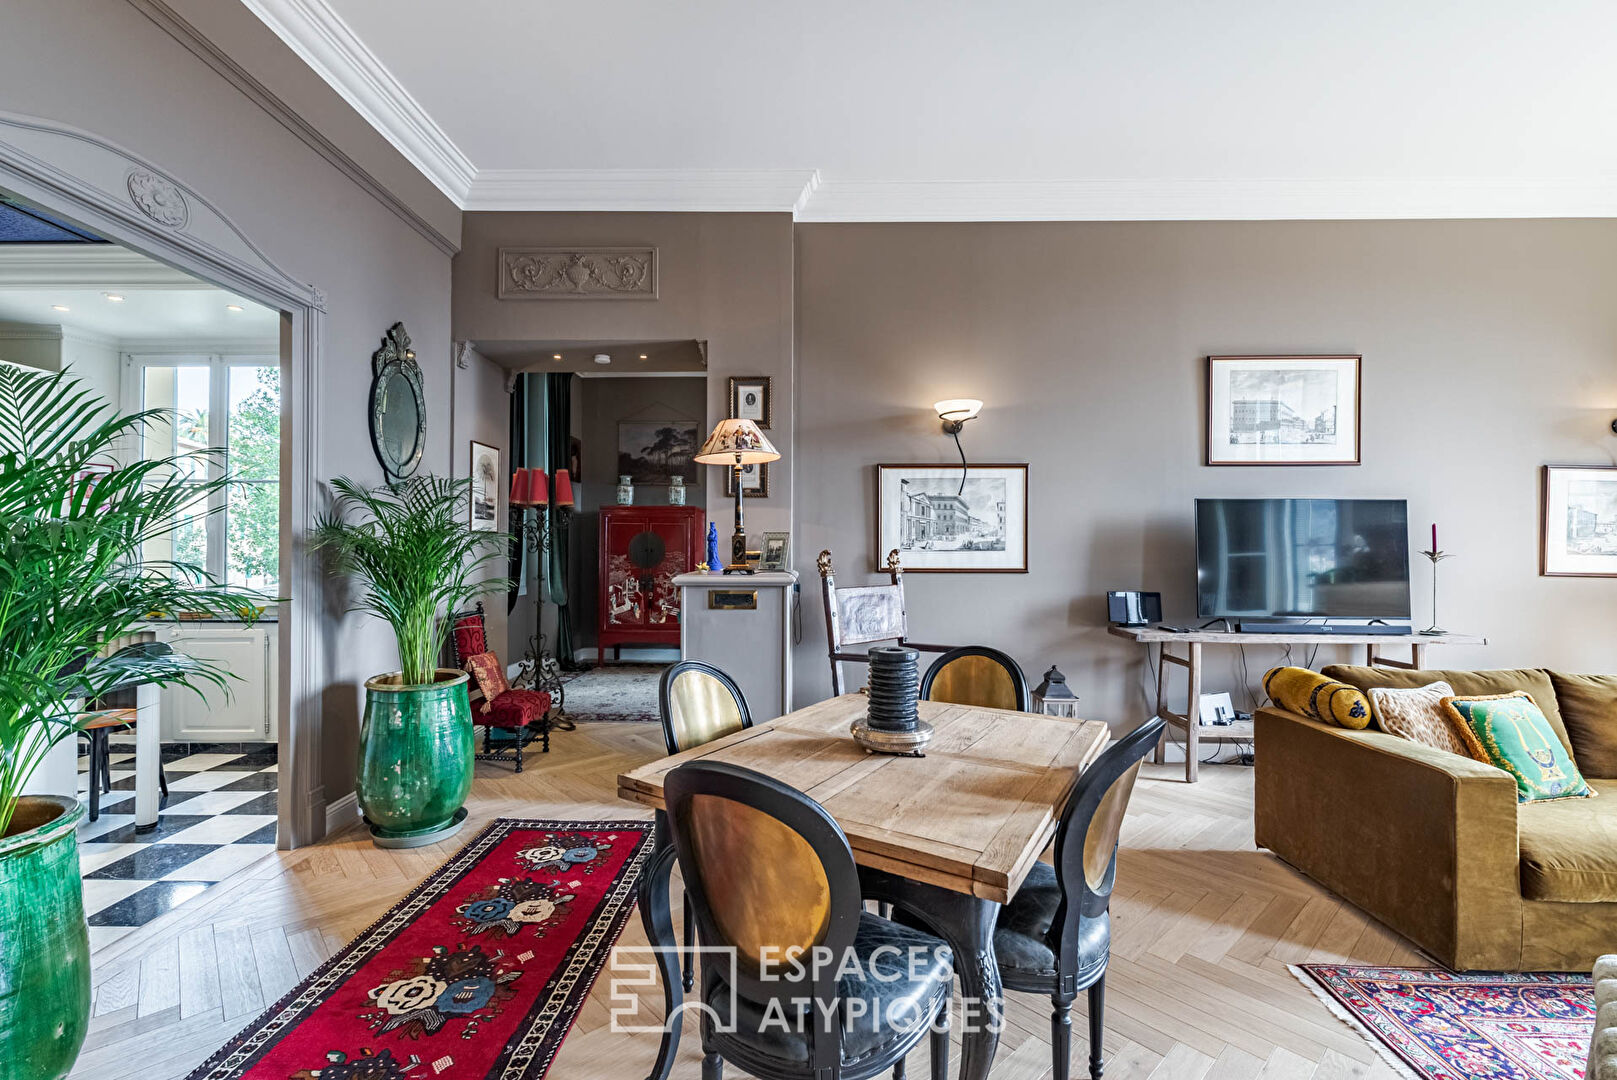 Charming apartment in Grasse.